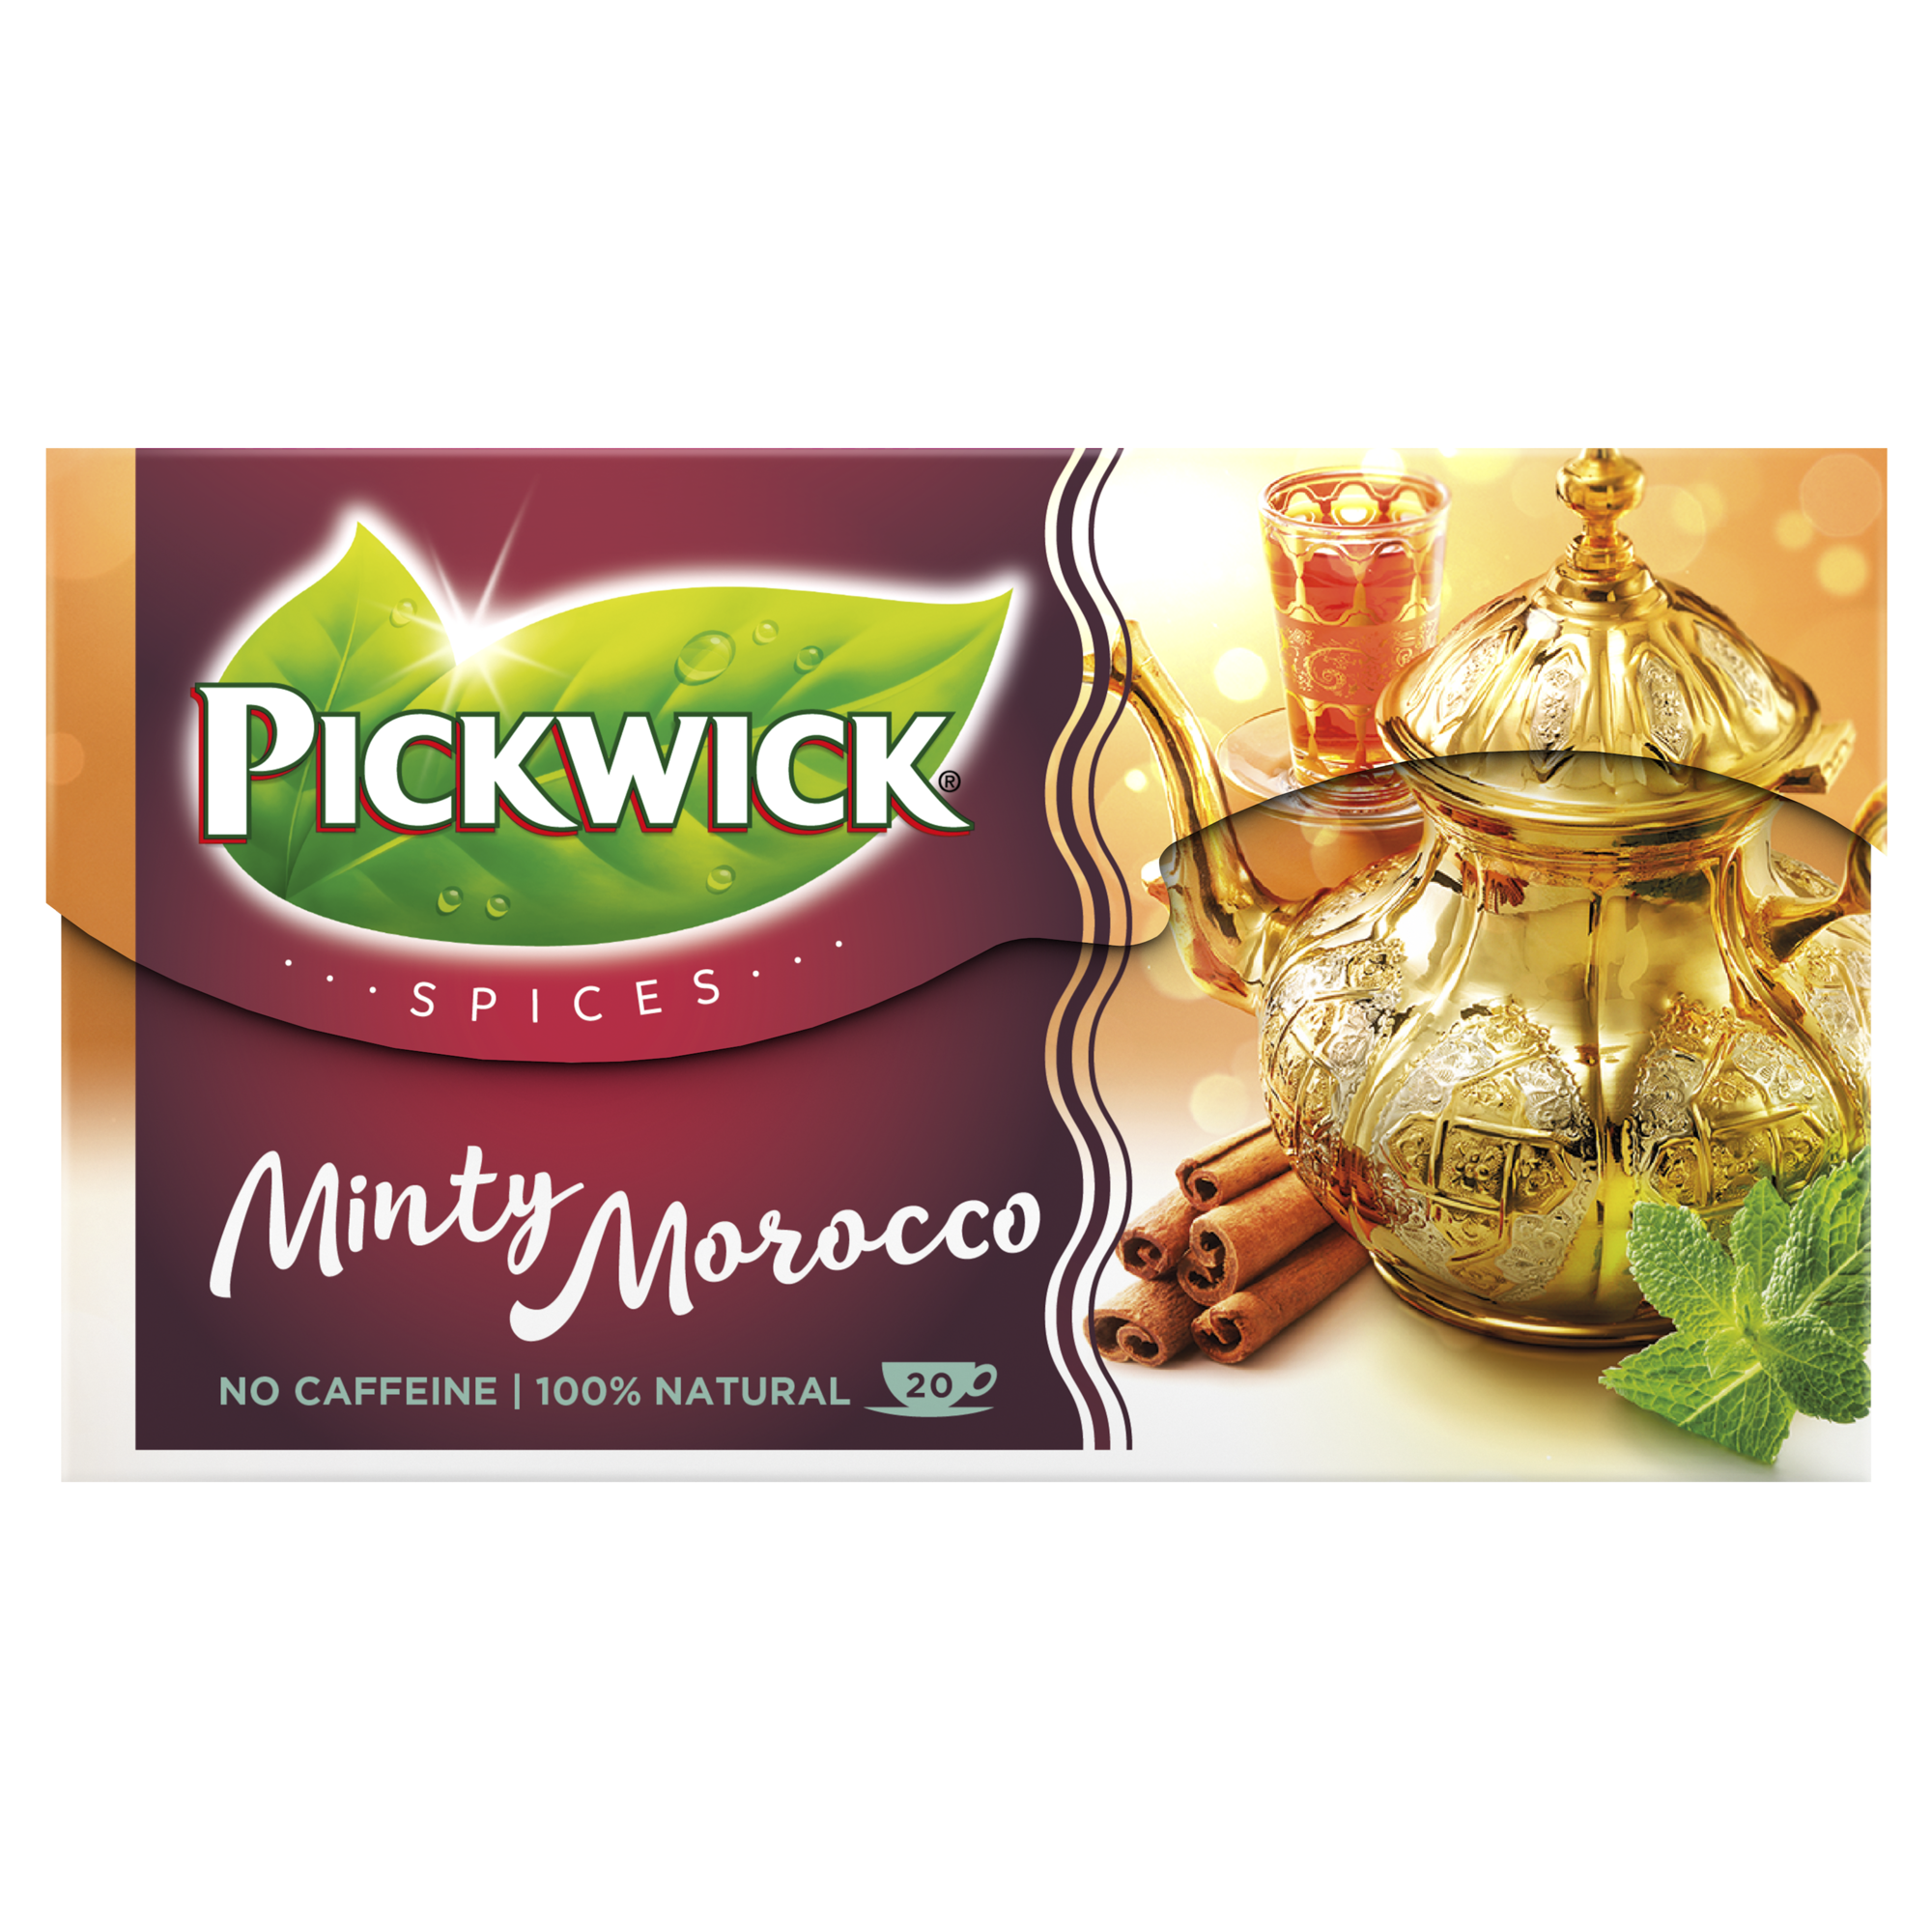 37955 Minty Morocco thee 240x2gr